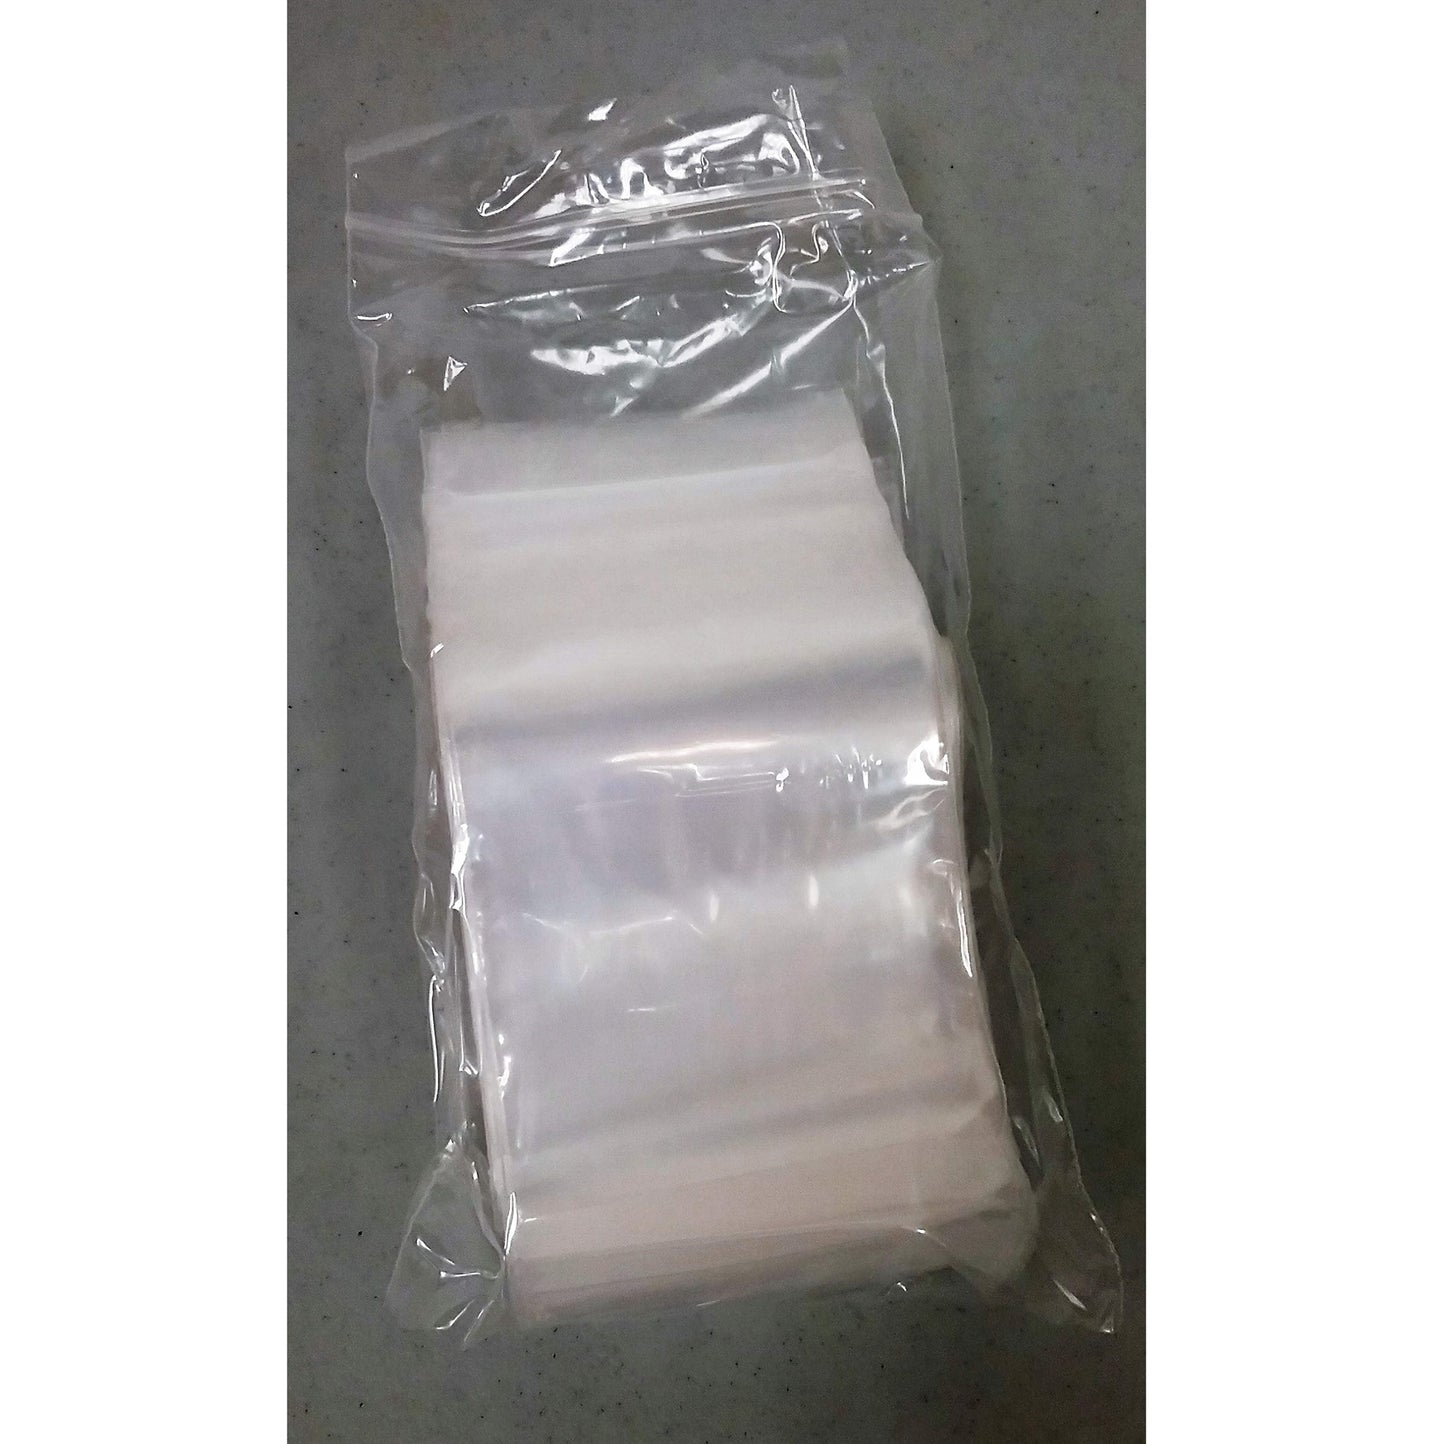 An image of a sealed package containing 50 clear poly zip-top bags. The bags are neatly stacked and enclosed in a plastic wrap, with a slight transparency that shows the zip-top closures. They are presented on a grey, speckled surface, indicative of a sturdy, utilitarian design for storage or organizational purposes.